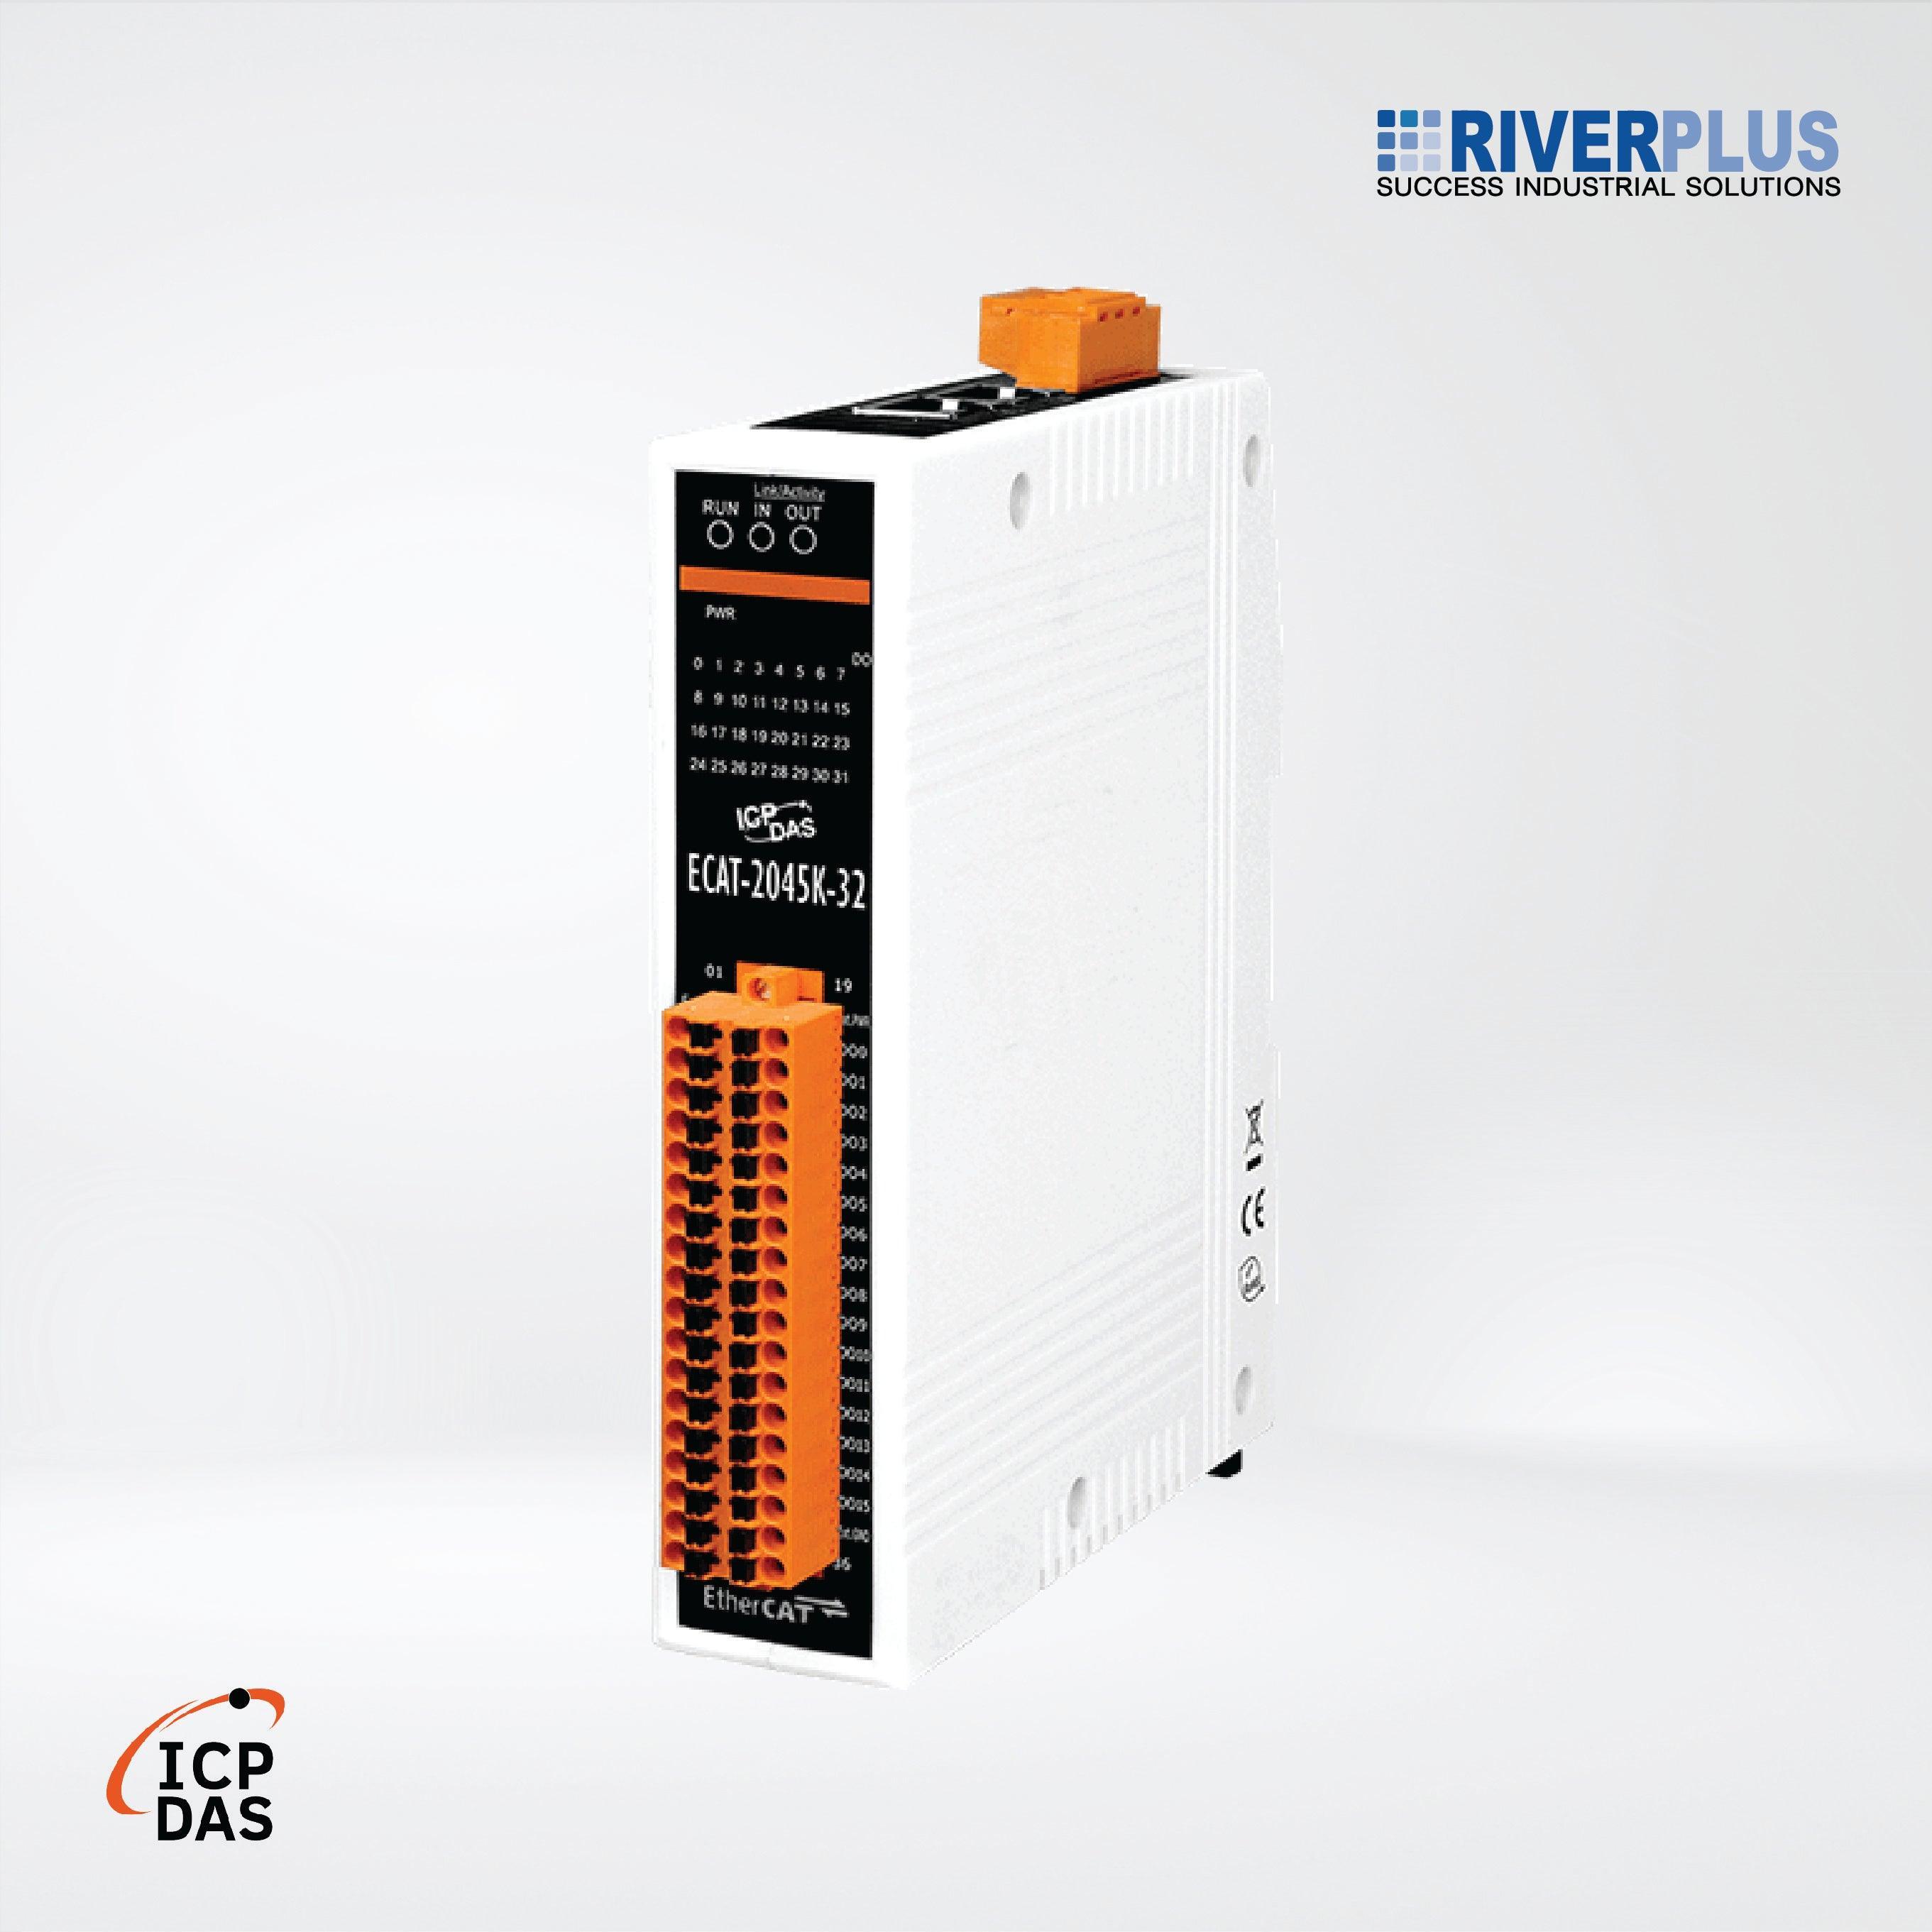 ECAT-2045K-32 EtherCAT Slave I/O Module with Isolated 32-ch DO (Keep output value) - Riverplus